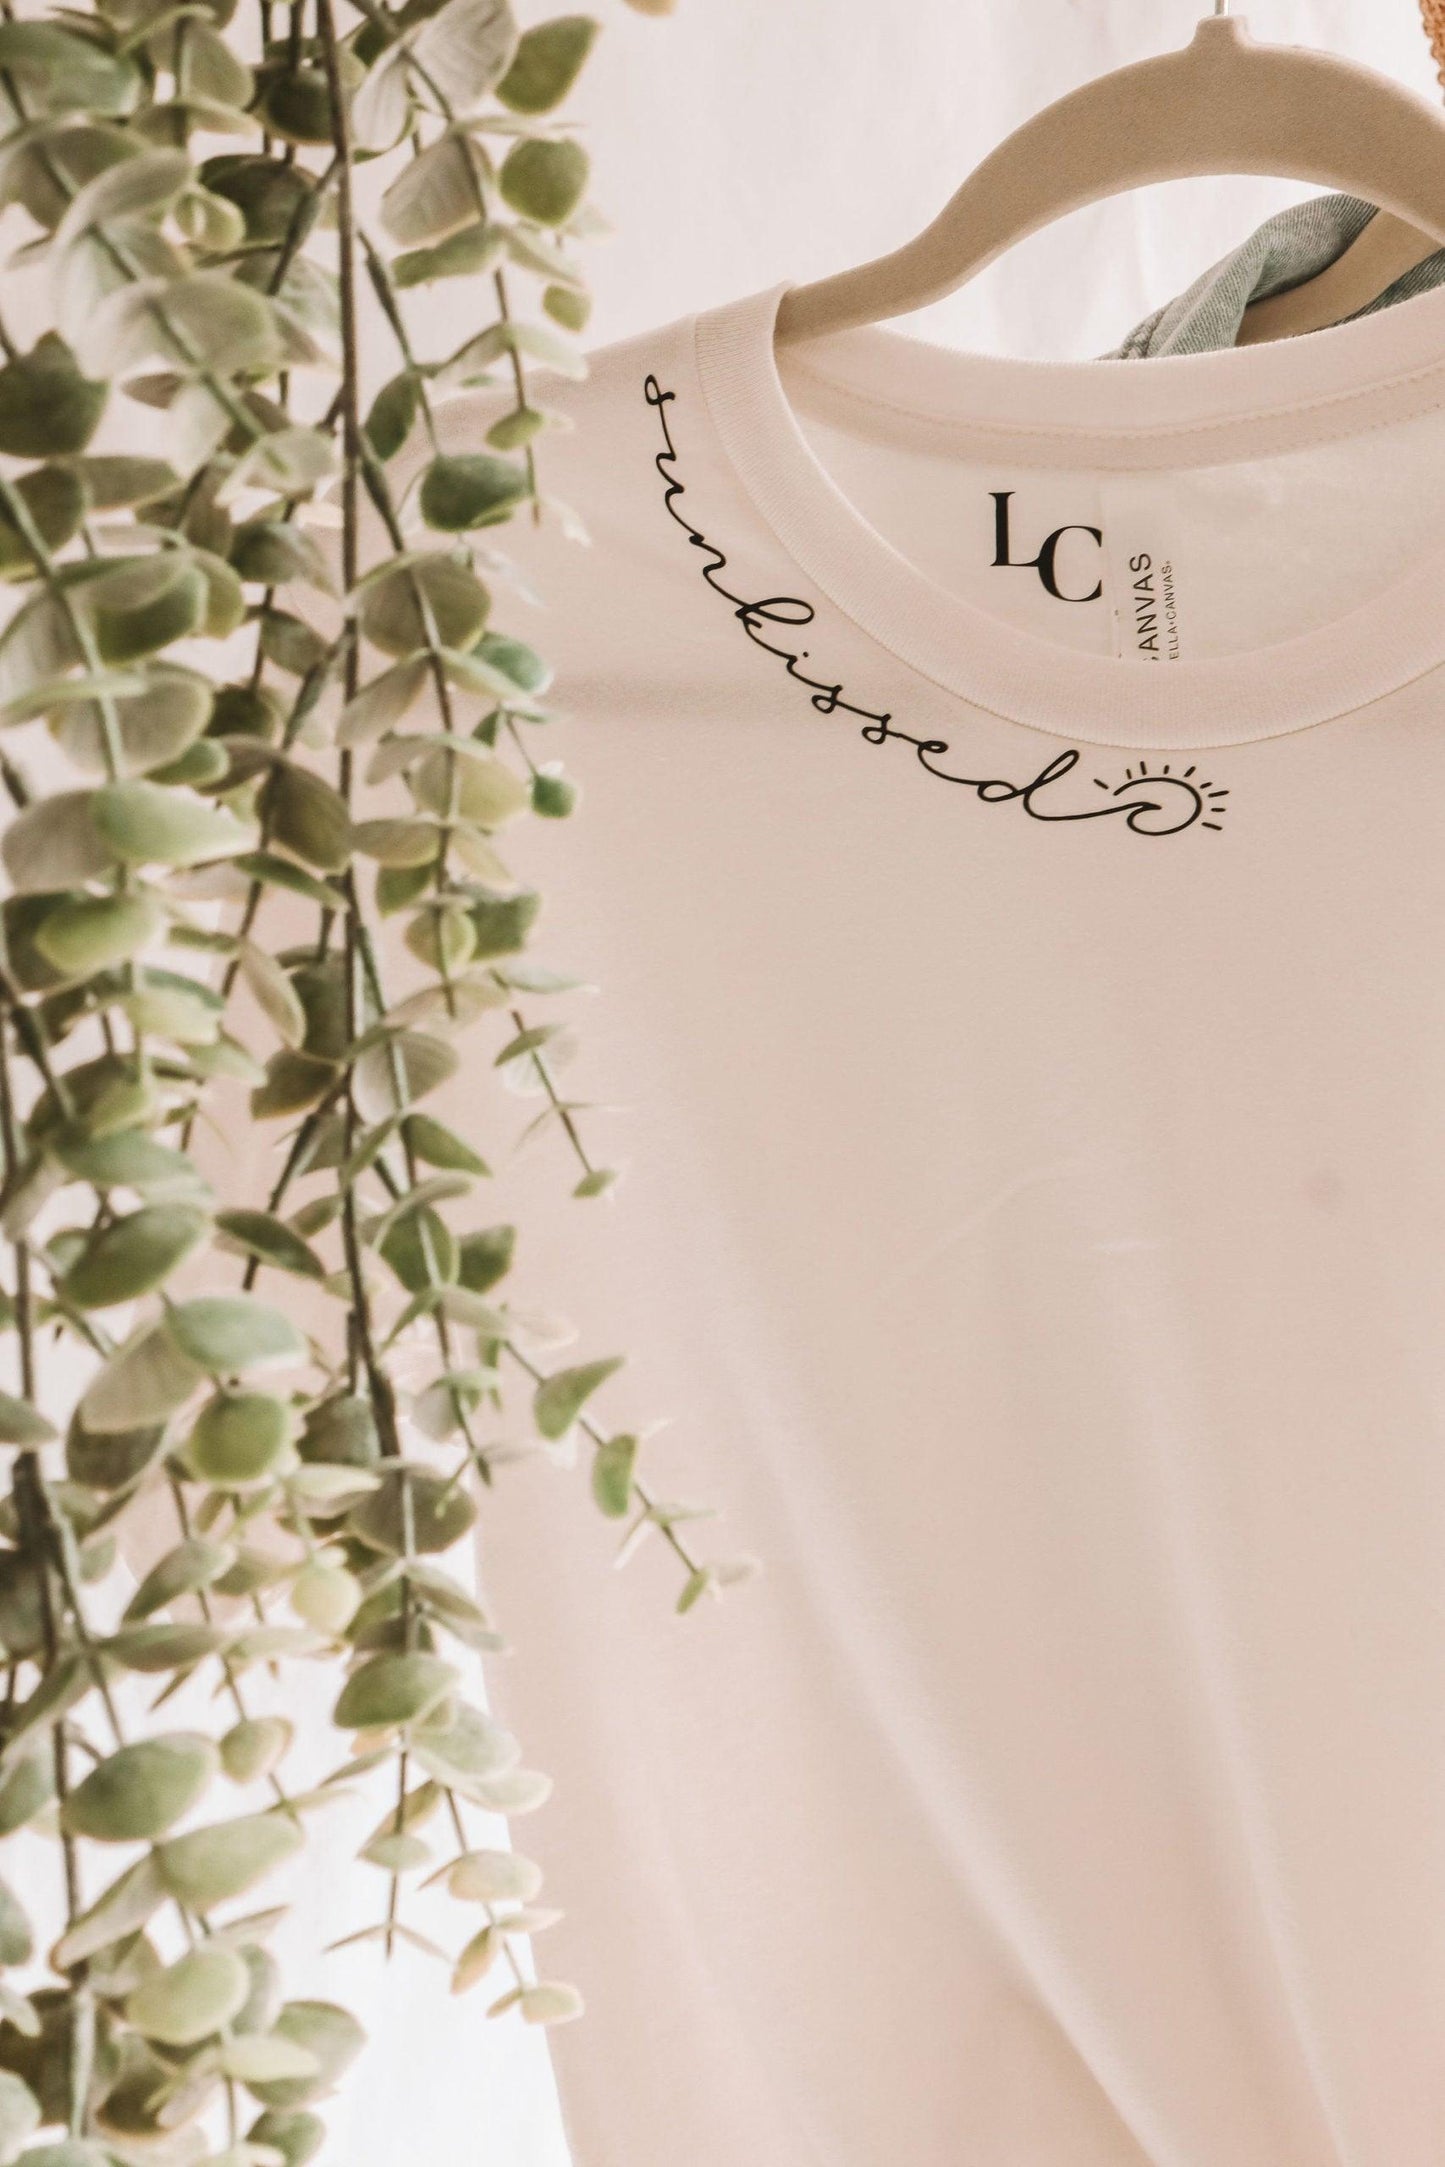 A close up photo of a white short sleeve t-shirt with sunkissed written in script text along the neckline. there's a wave and a sun in the script. It's hanging on a clothing rack with vines.